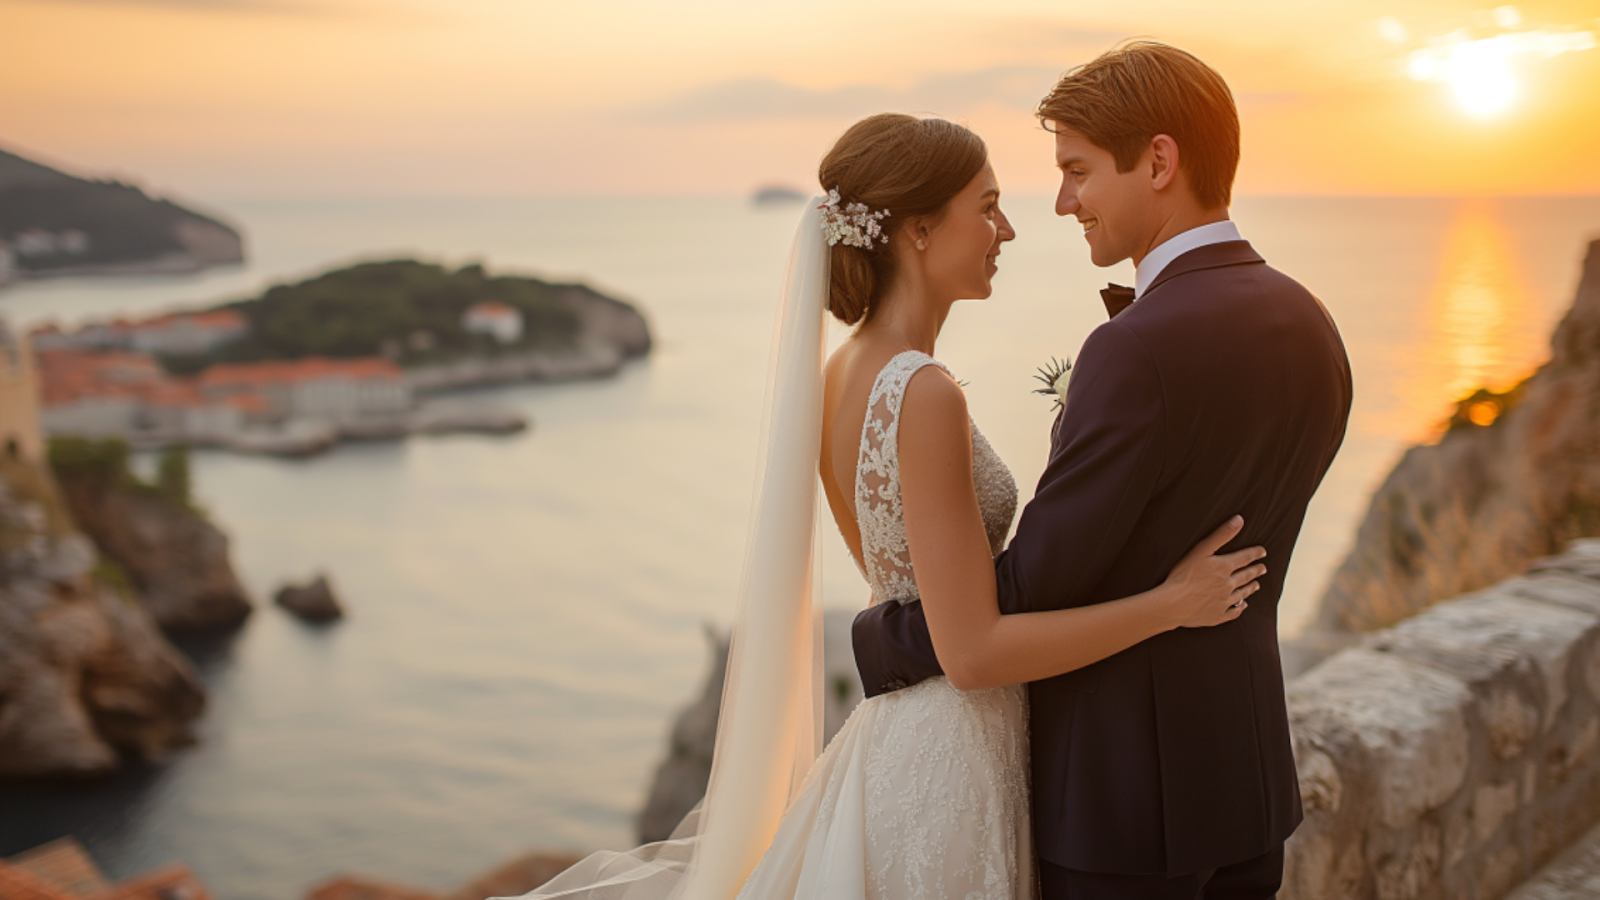 A newly married couple against the backdrop of Dubrovnik's ancient walls.